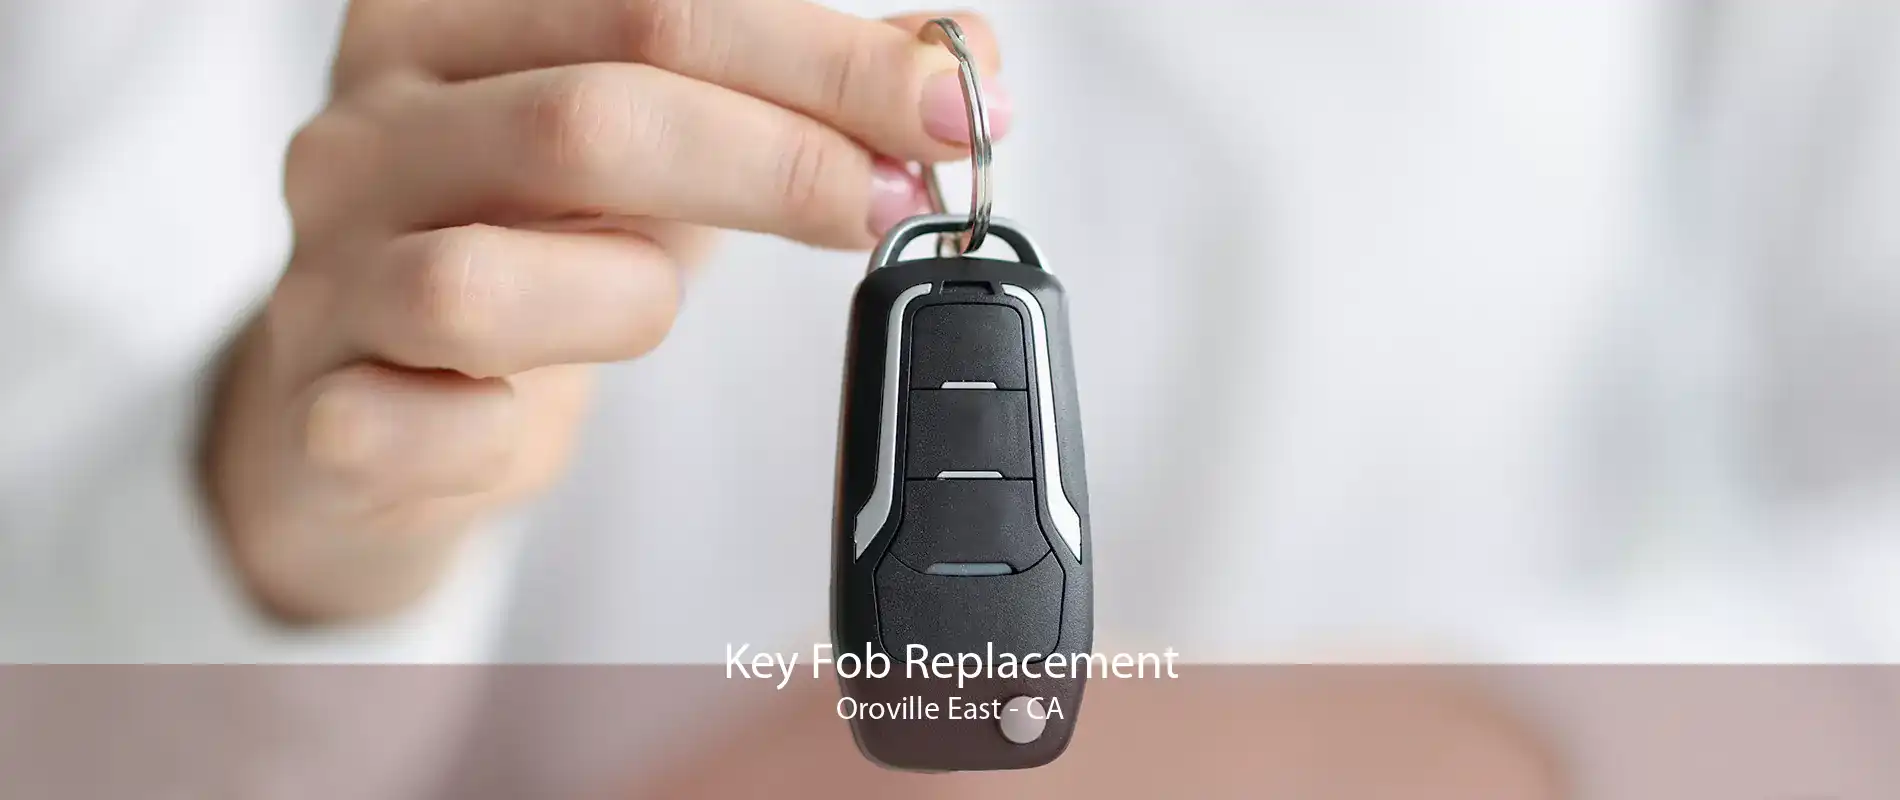 Key Fob Replacement Oroville East - CA